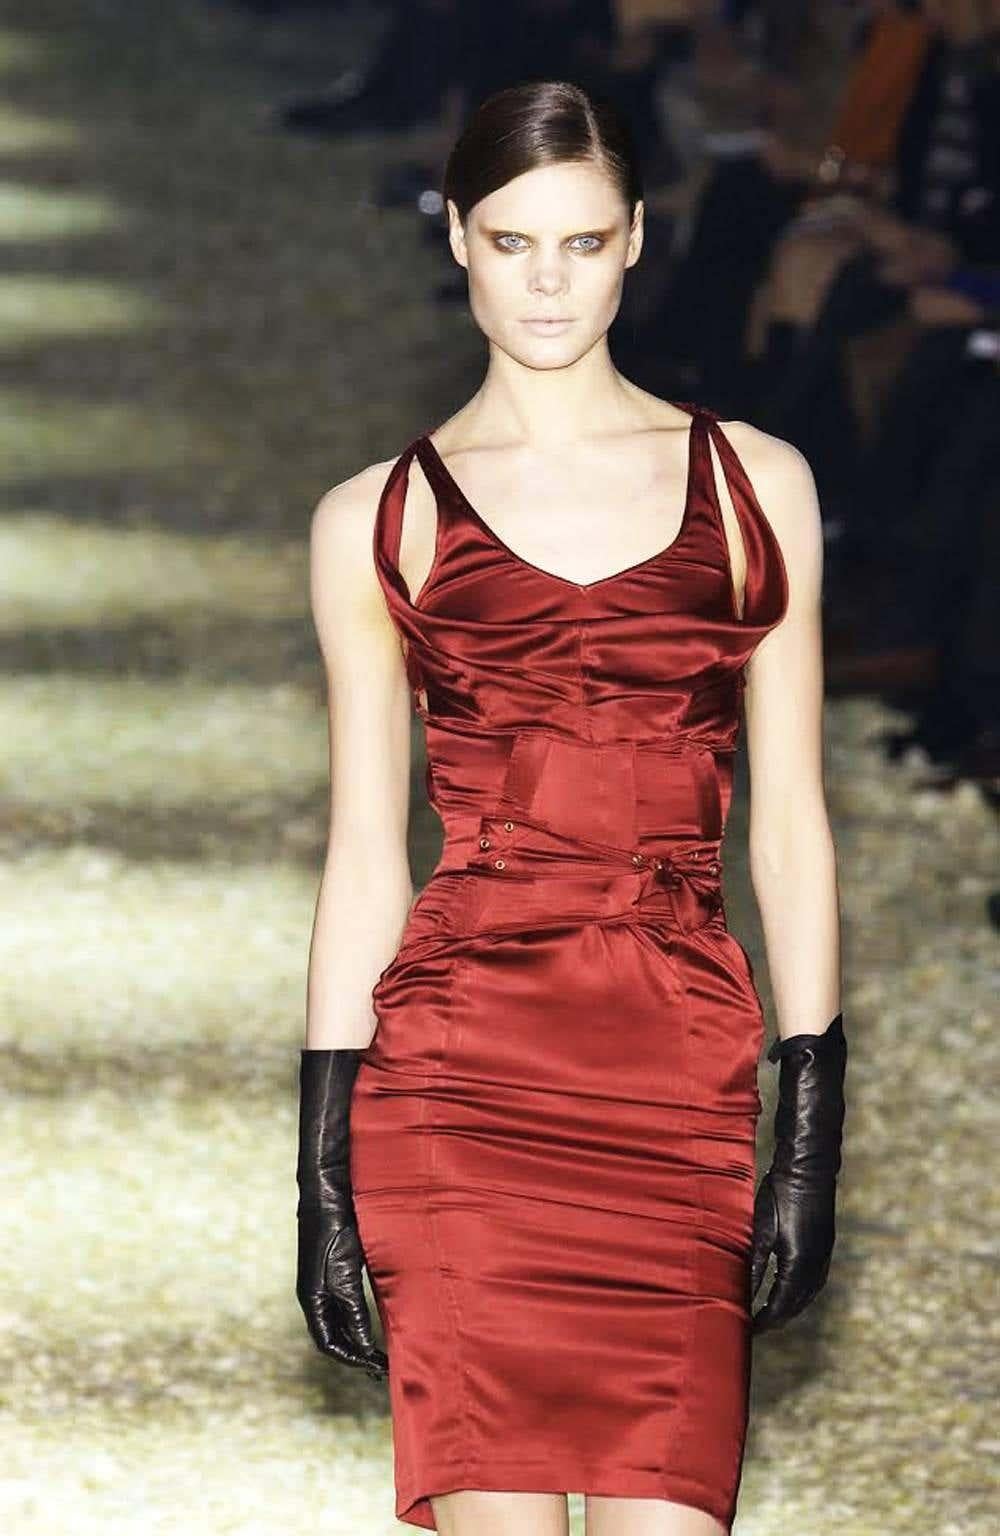 Presenting a stunning ruby red silk satin corset Gucci dress, designed by Tom Ford. From the Fall/Winter 2003 collection, this dress debuted as look number 32 on the season's runway modeled by Adina Fohlin. Constructed entirely of a luxurious satin